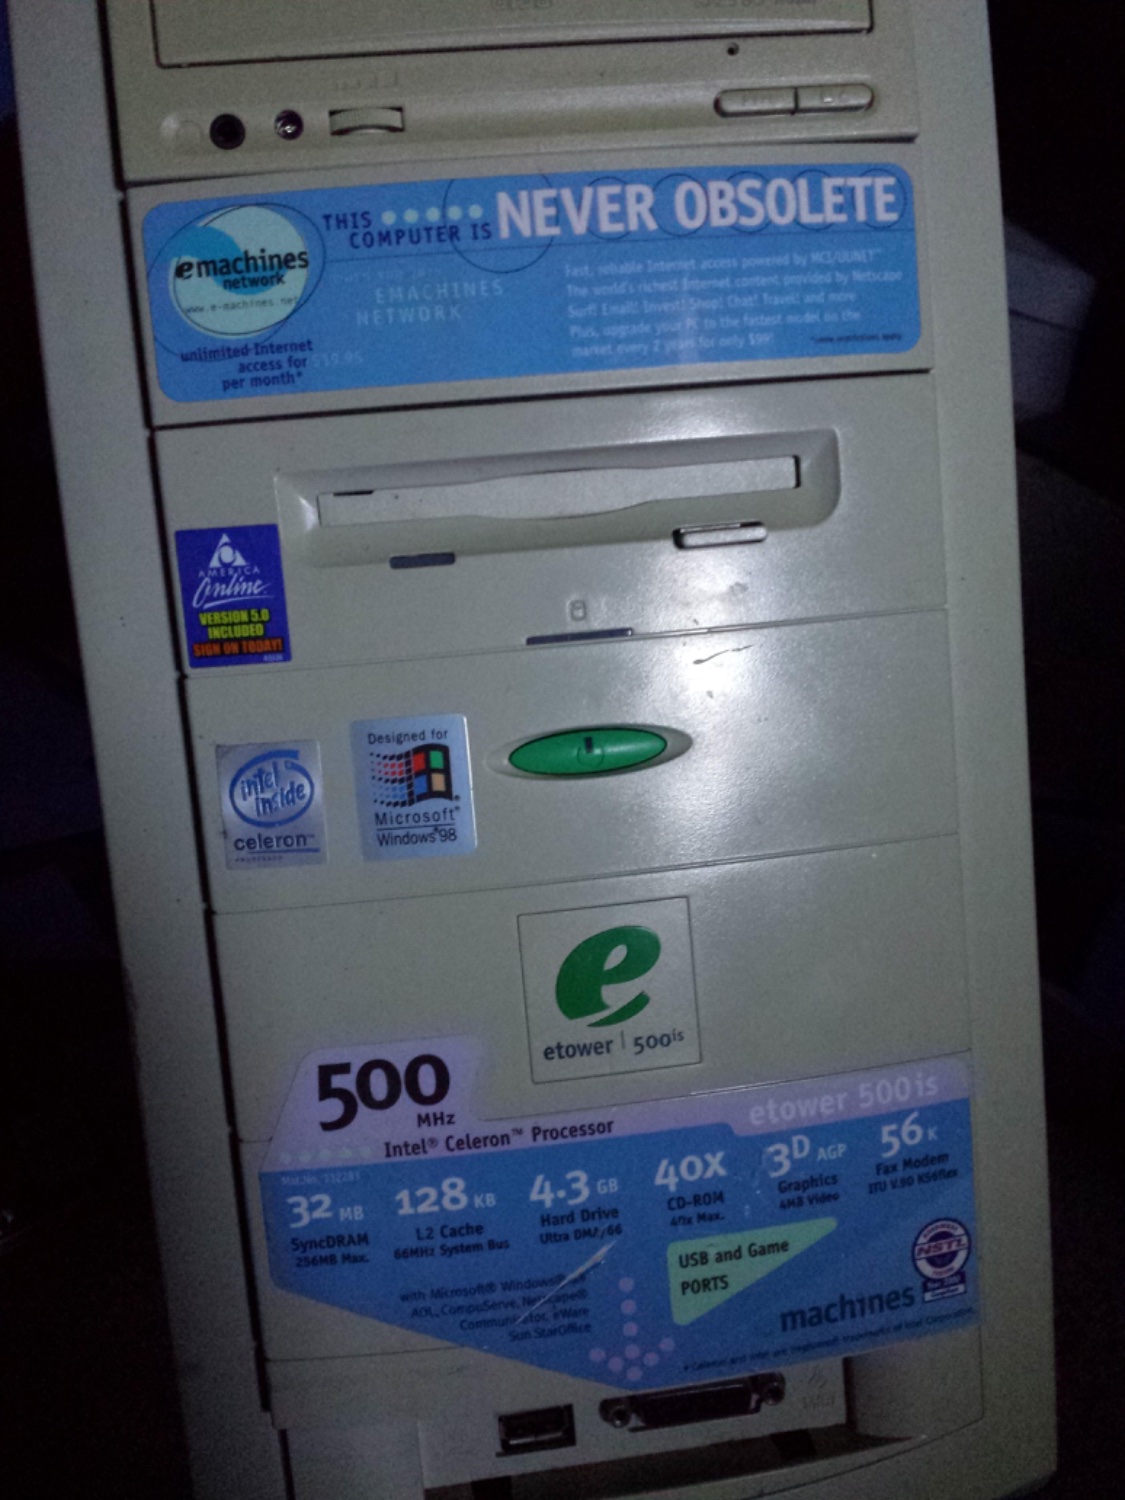 Never obsolete!